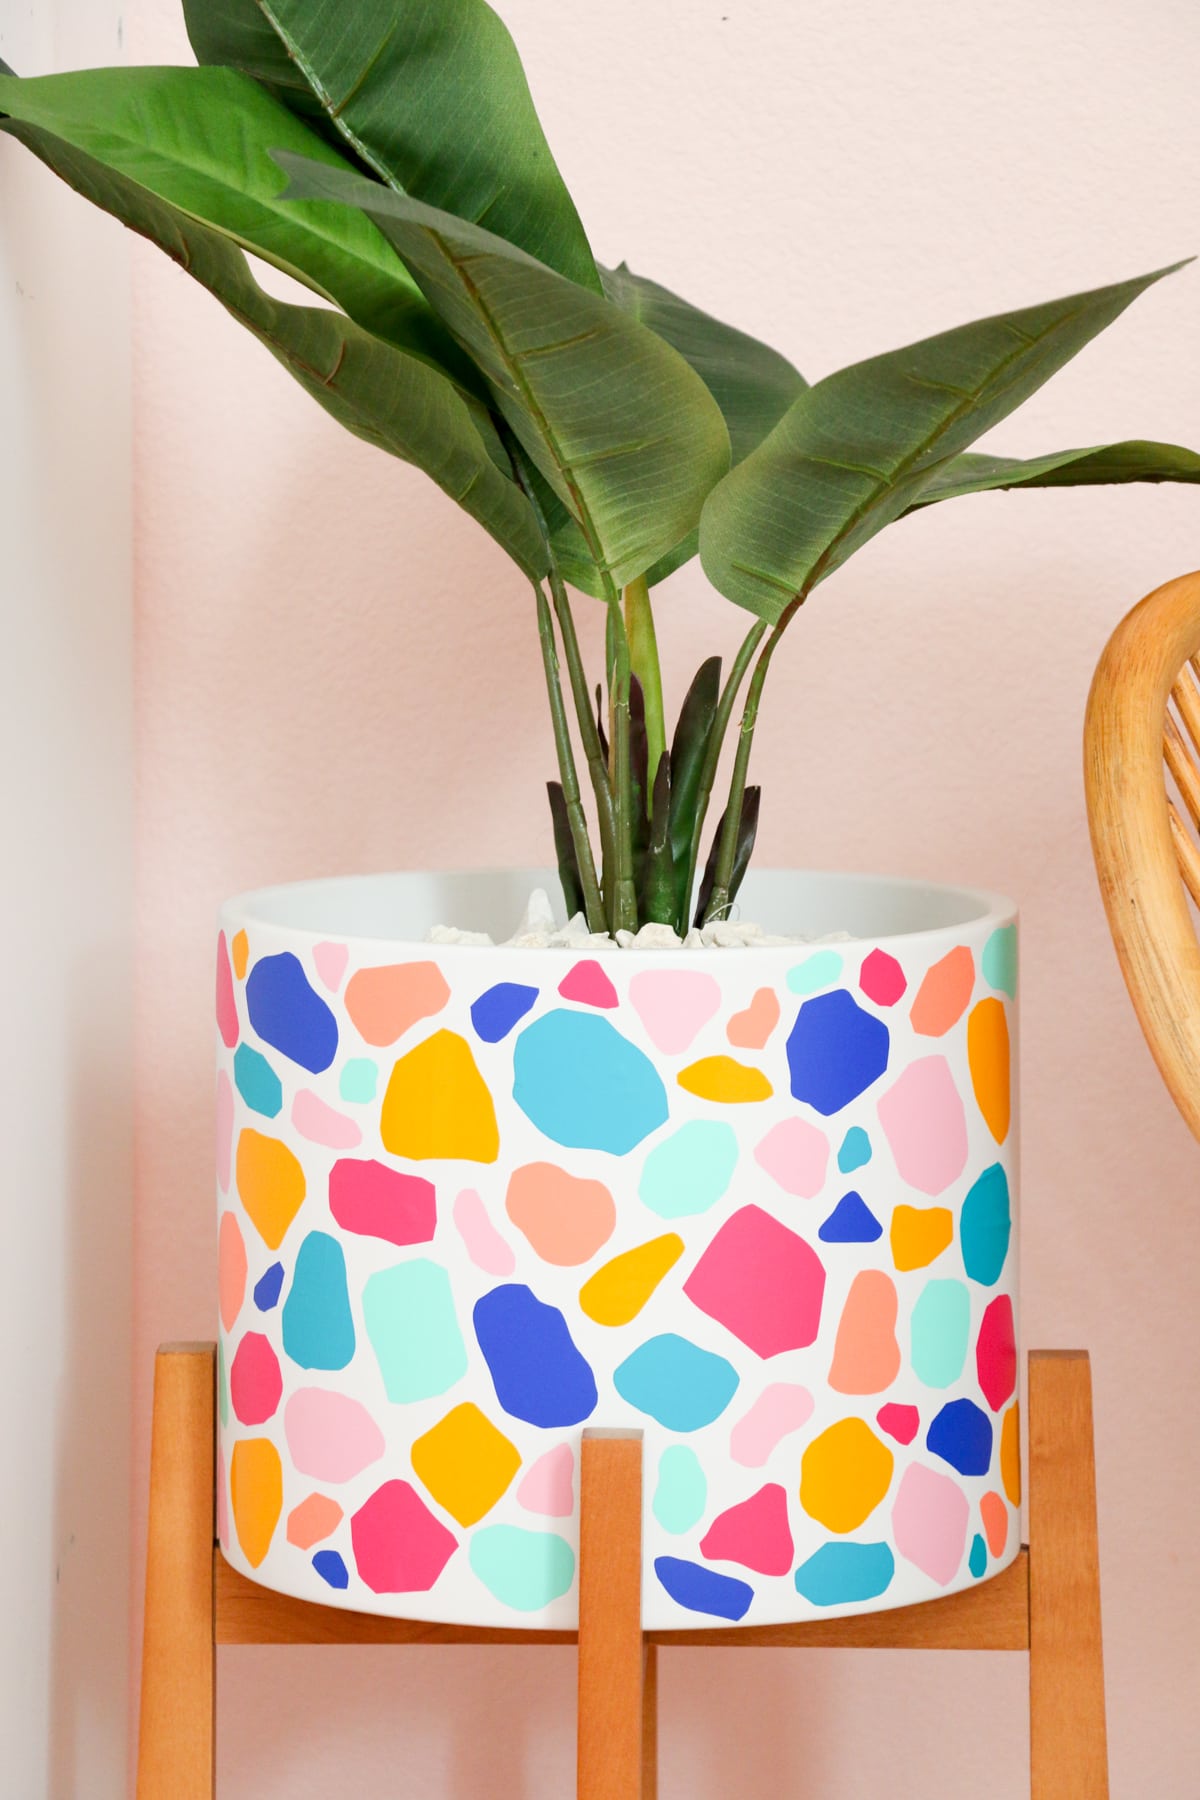 Terrazo style stand planter that looks painted by using colorful vinyl shapes